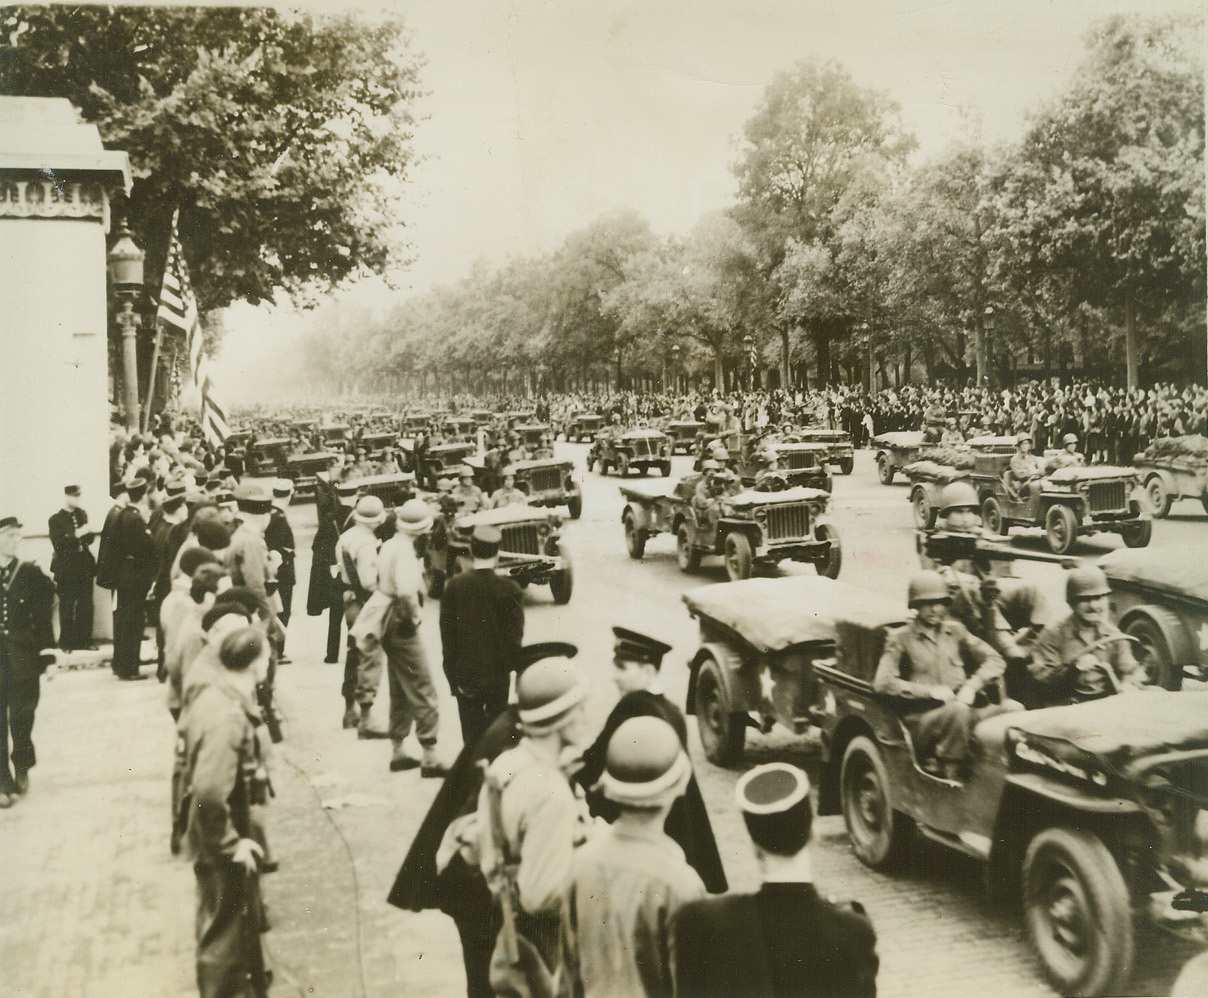 American Jeeps See Paris, 9/3/1944. PARIS -- Spaced out across the wide Paris street, American Jeeps with trailers participate in the grand parade of US troops and mechanized units on August 29. Civilians line the streets, eager to view their liberators. Credit (ACME) (WP);